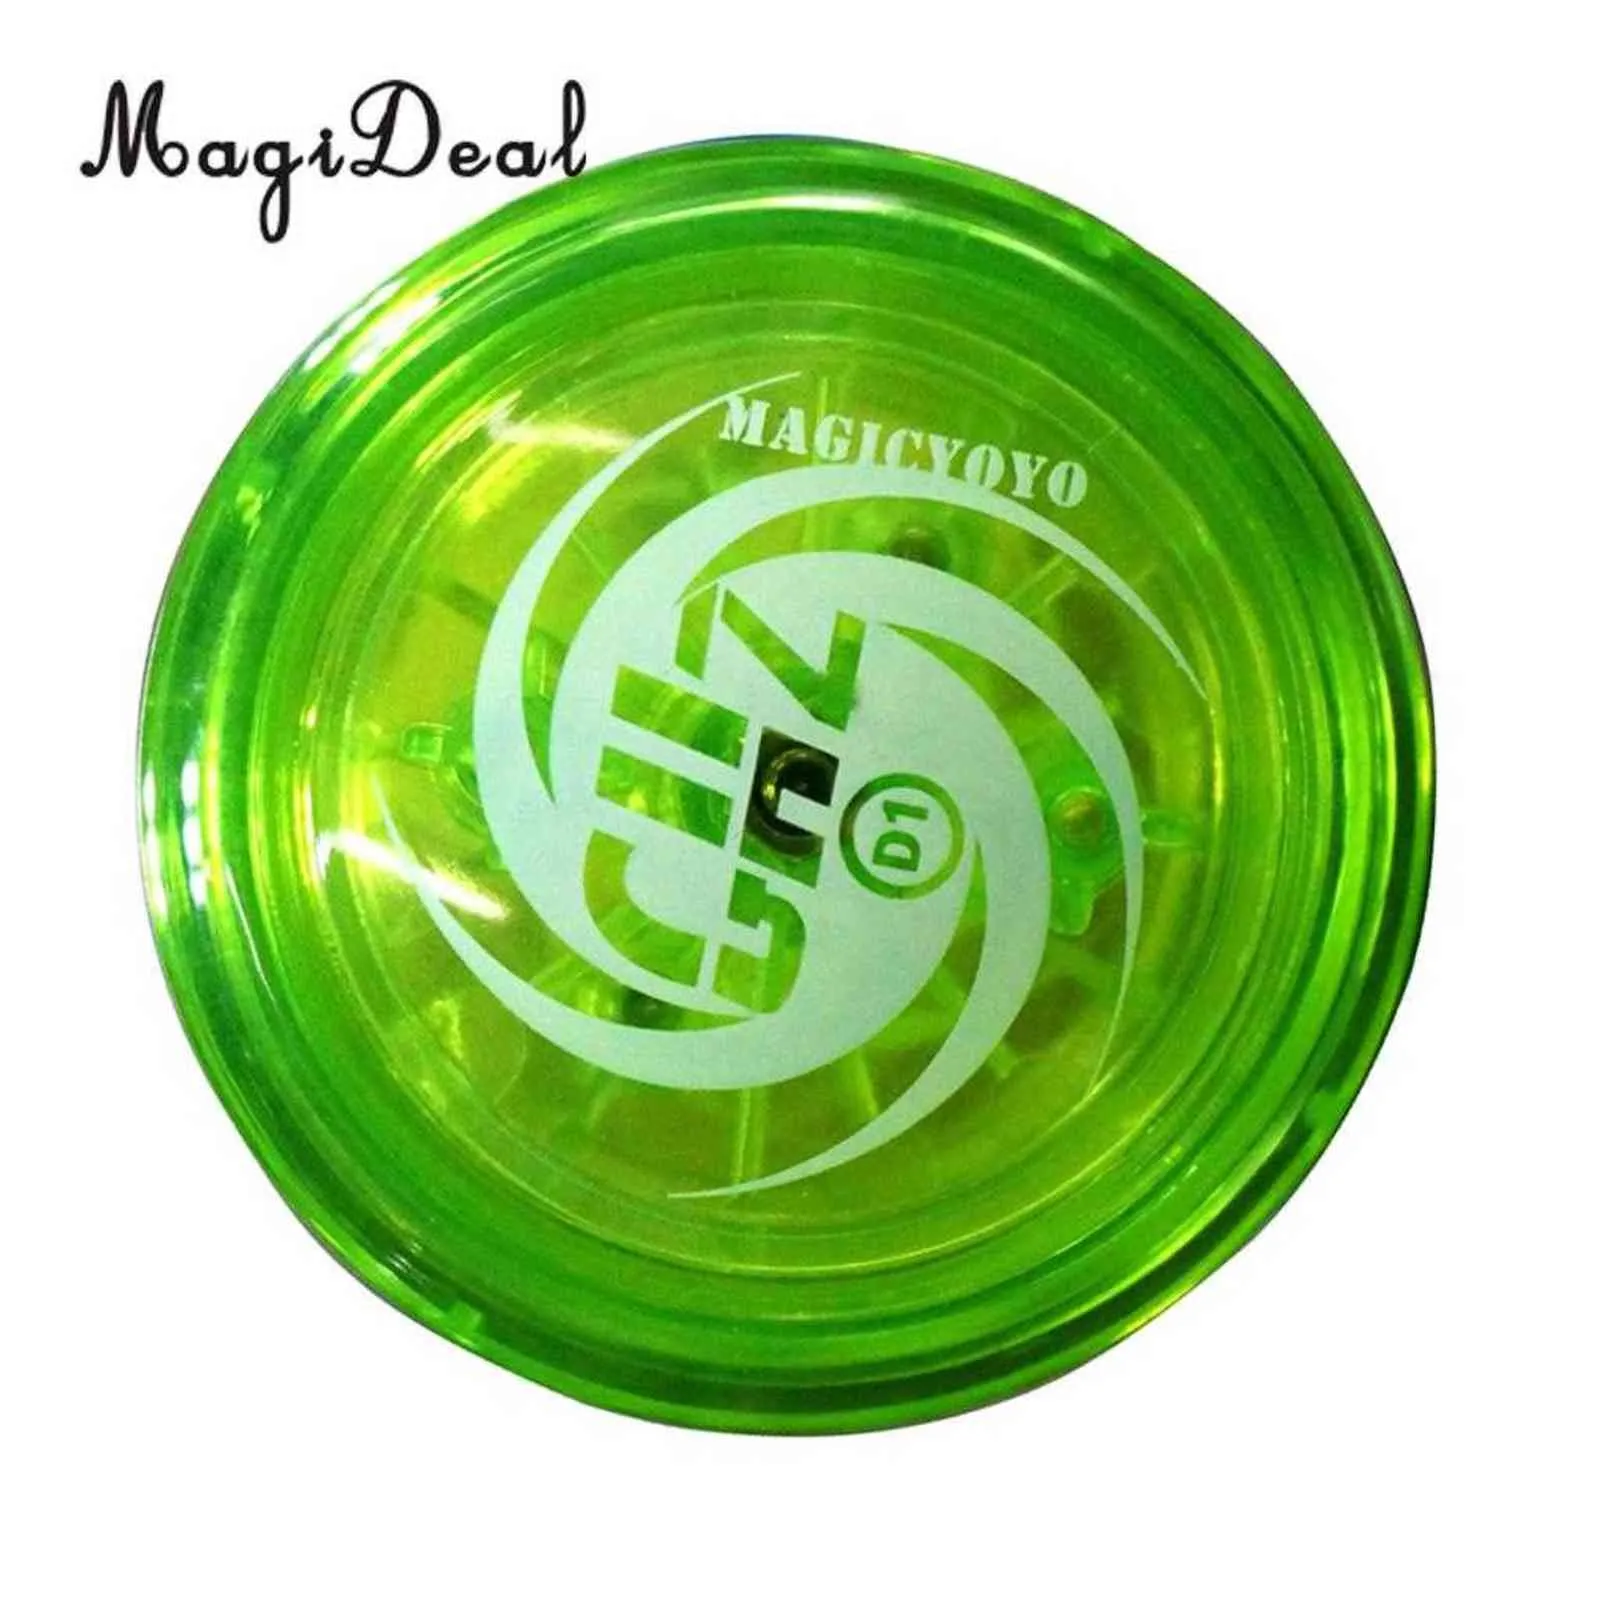 Plastic D1 Spin Ball Professional YoYo Size E Bearing with String for Kids Children Adult Classic Toy Green